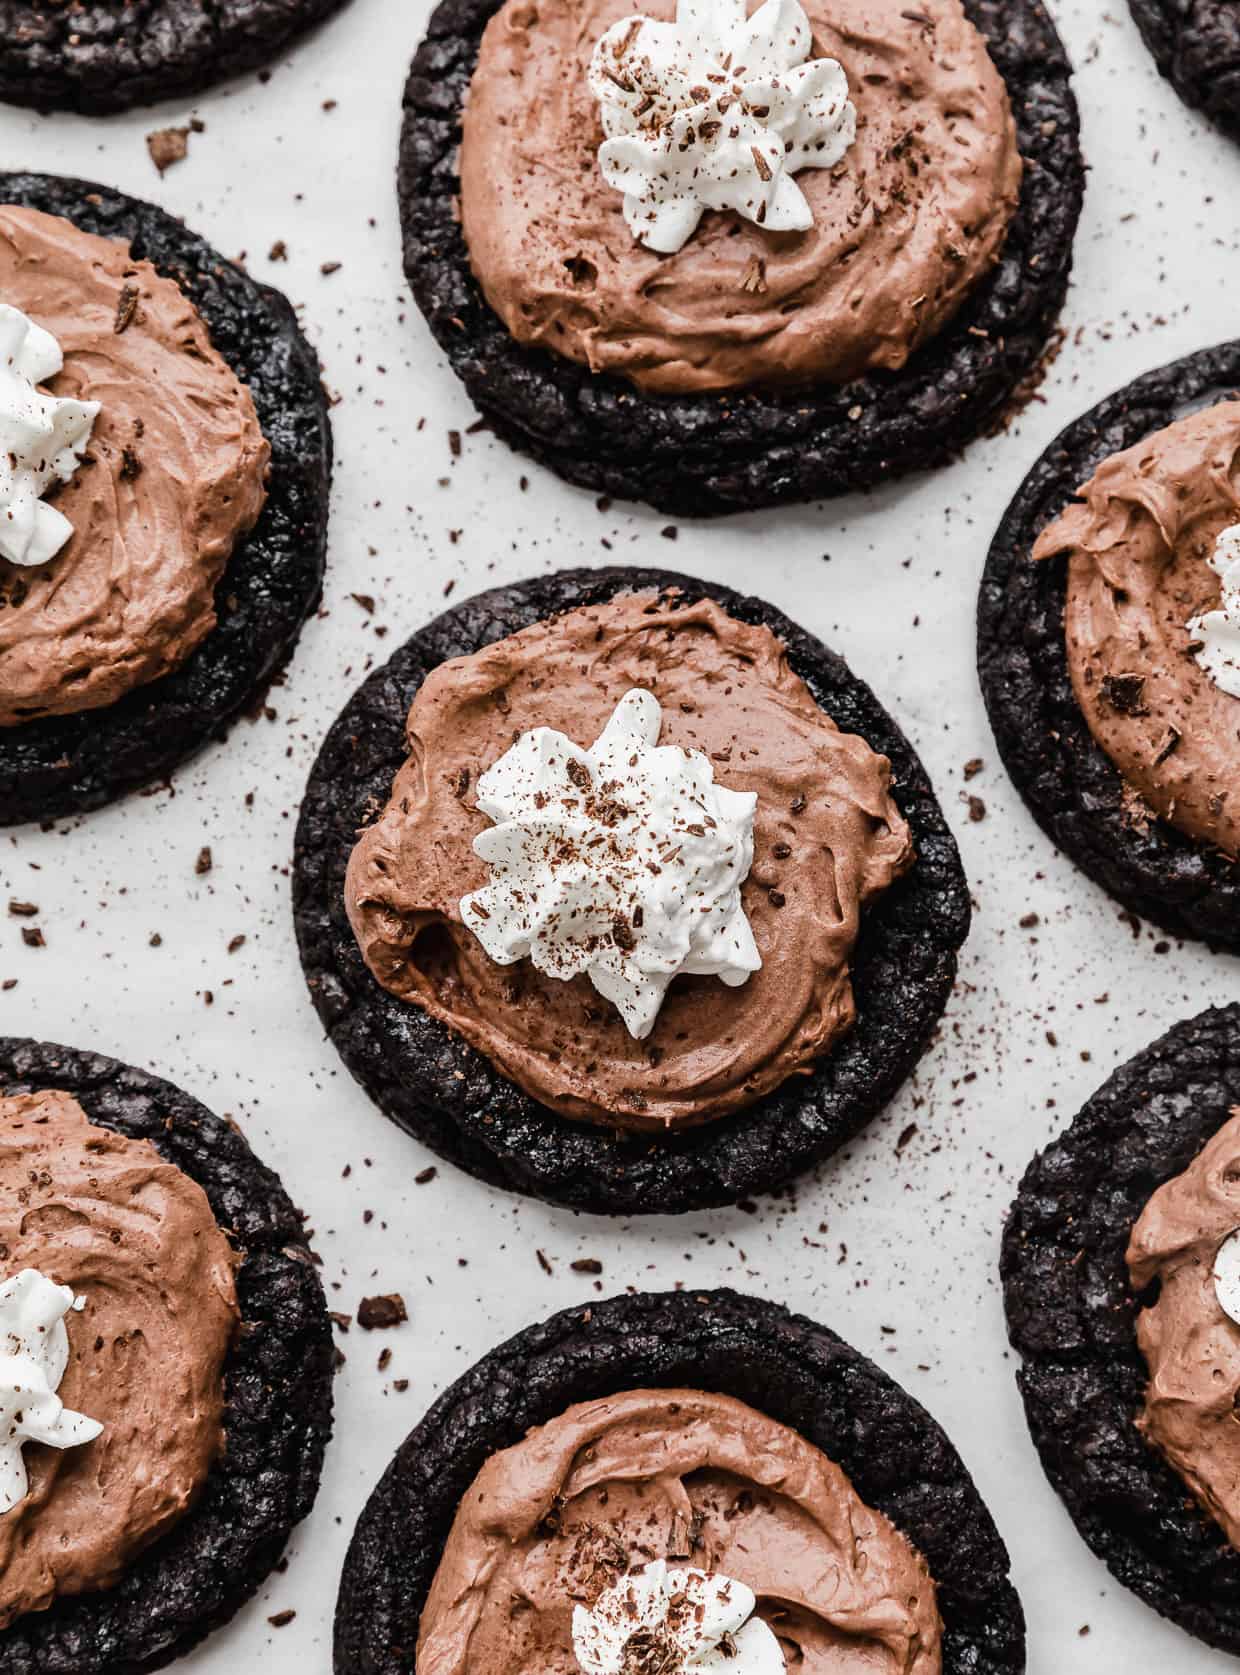 French Silk Pie Cookies: Oreo cookie base topped with chocolate mousse, whipped cream, and chocolate shavings.